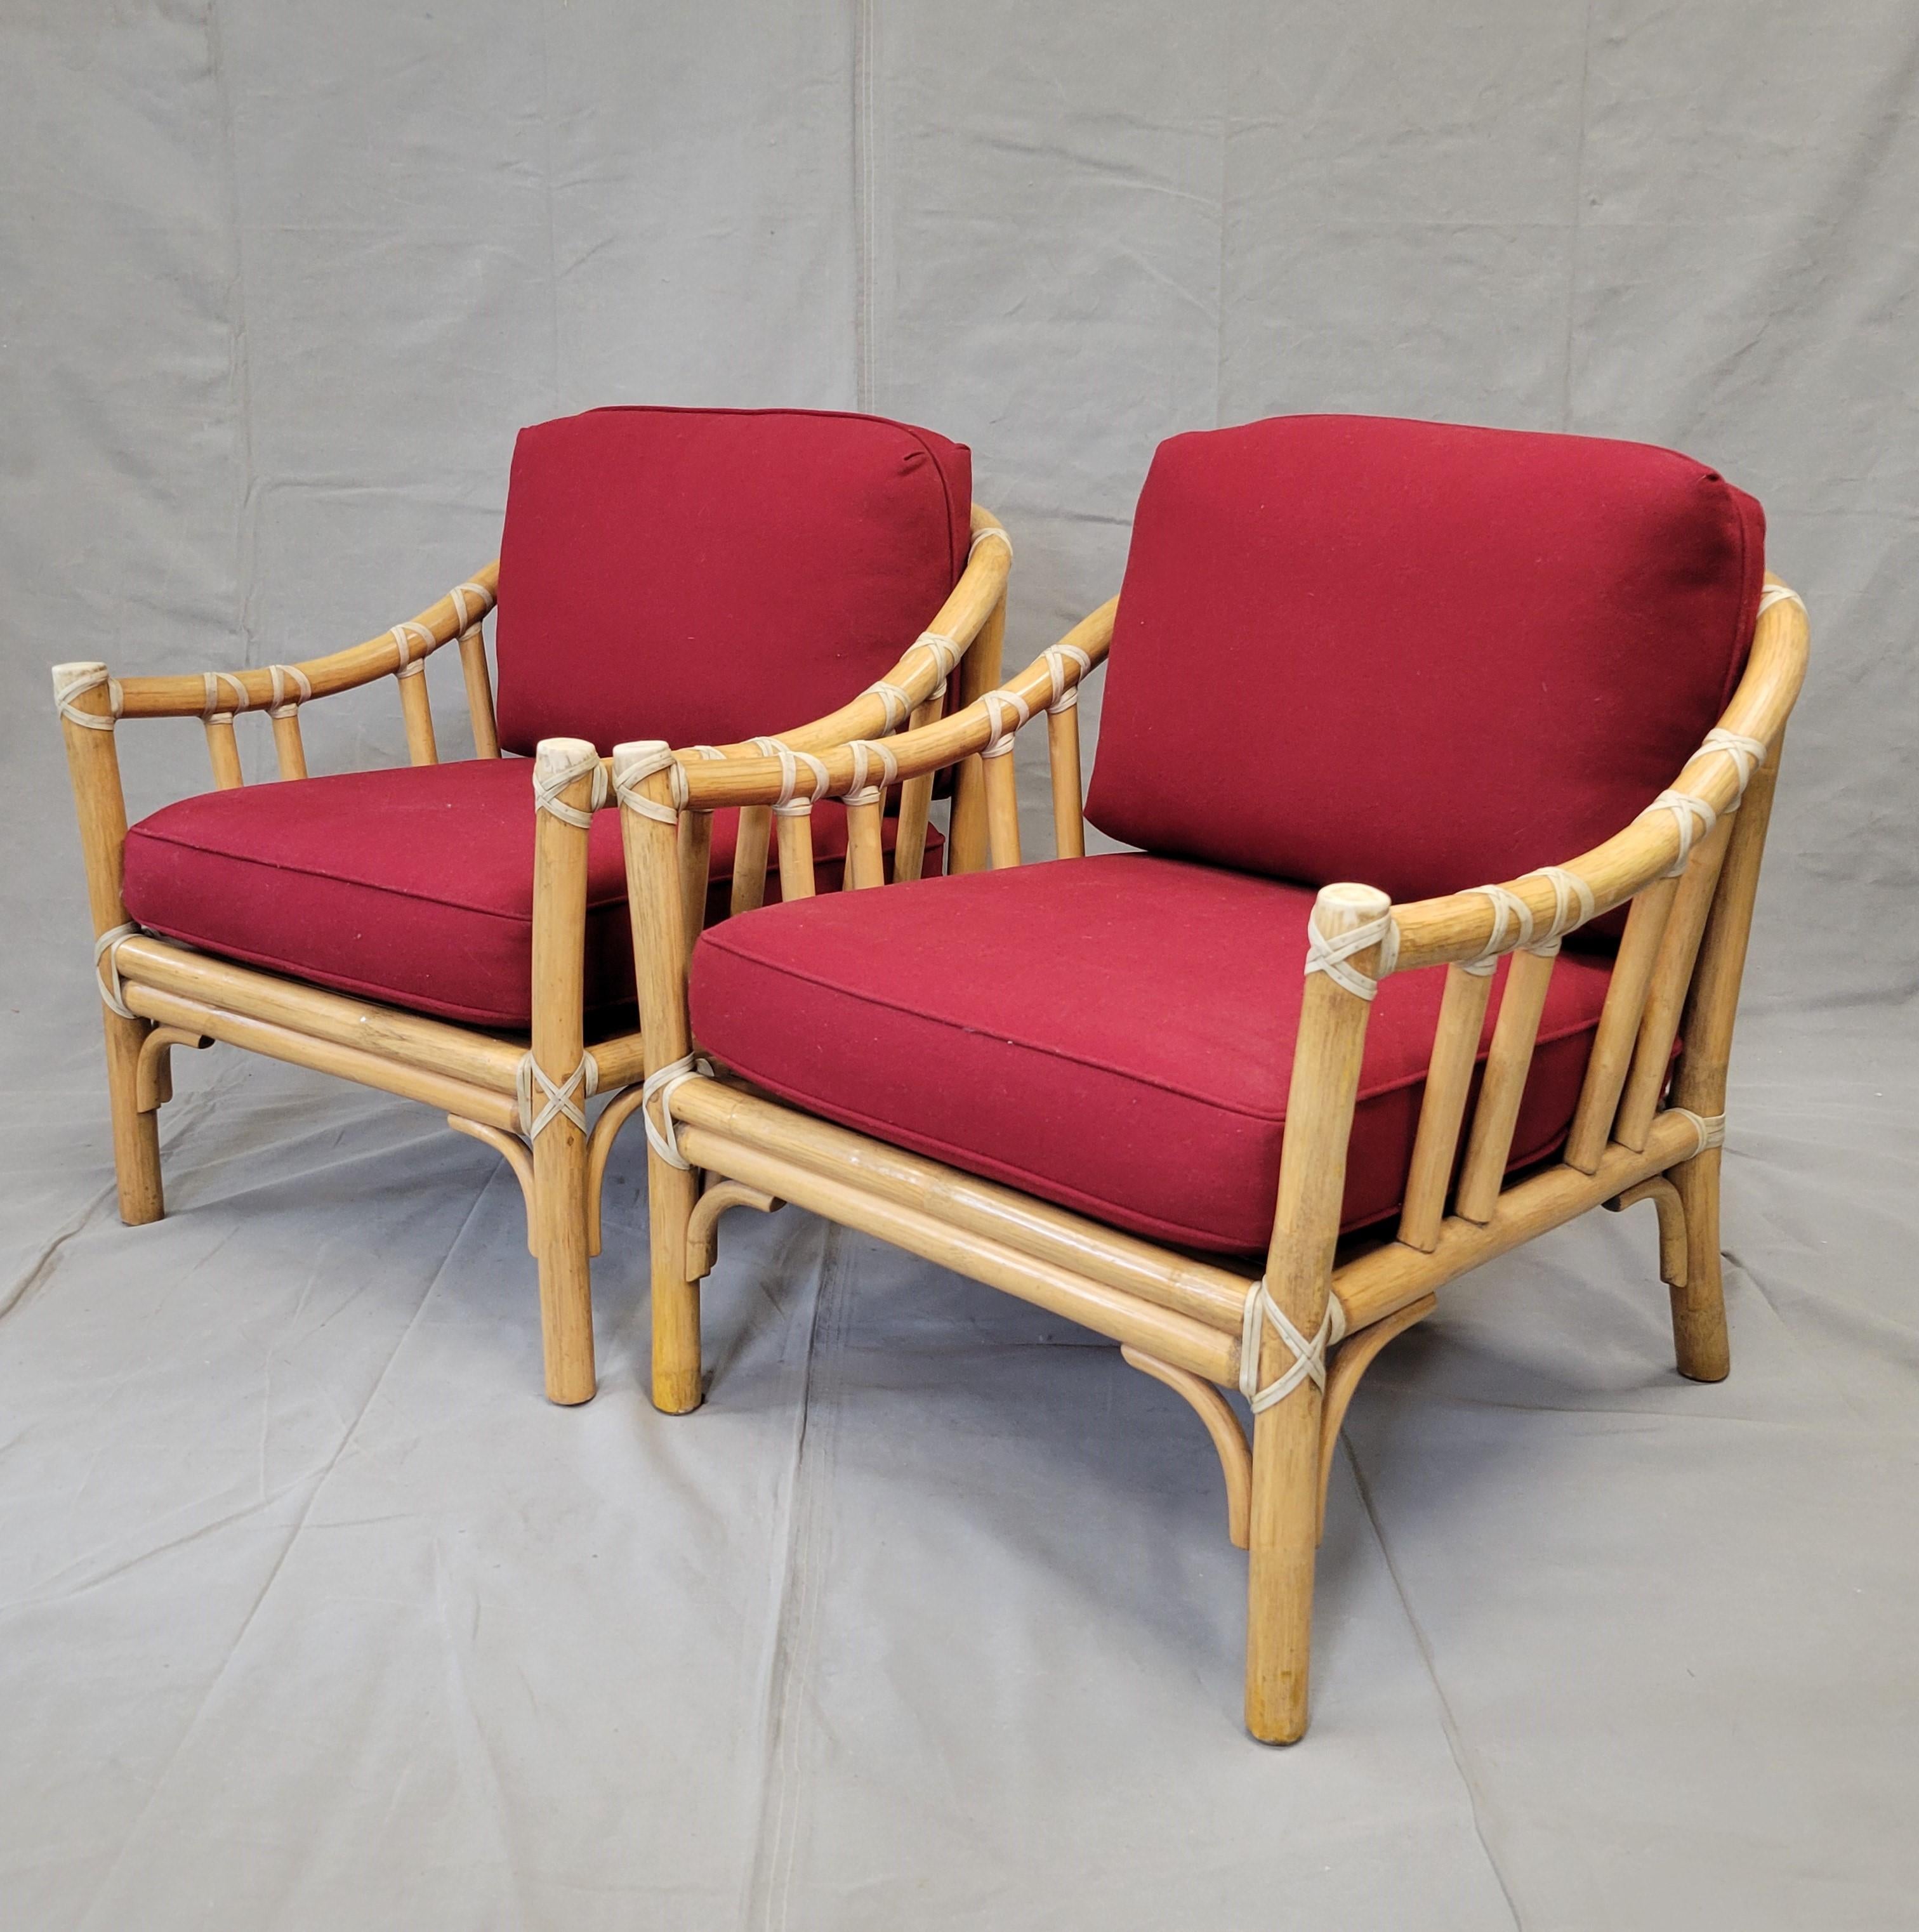 Mid-Century Modern Vintage 1978 McGuire Bamboo Lounge Chairs With Two Sets of Cushions - a Pair For Sale